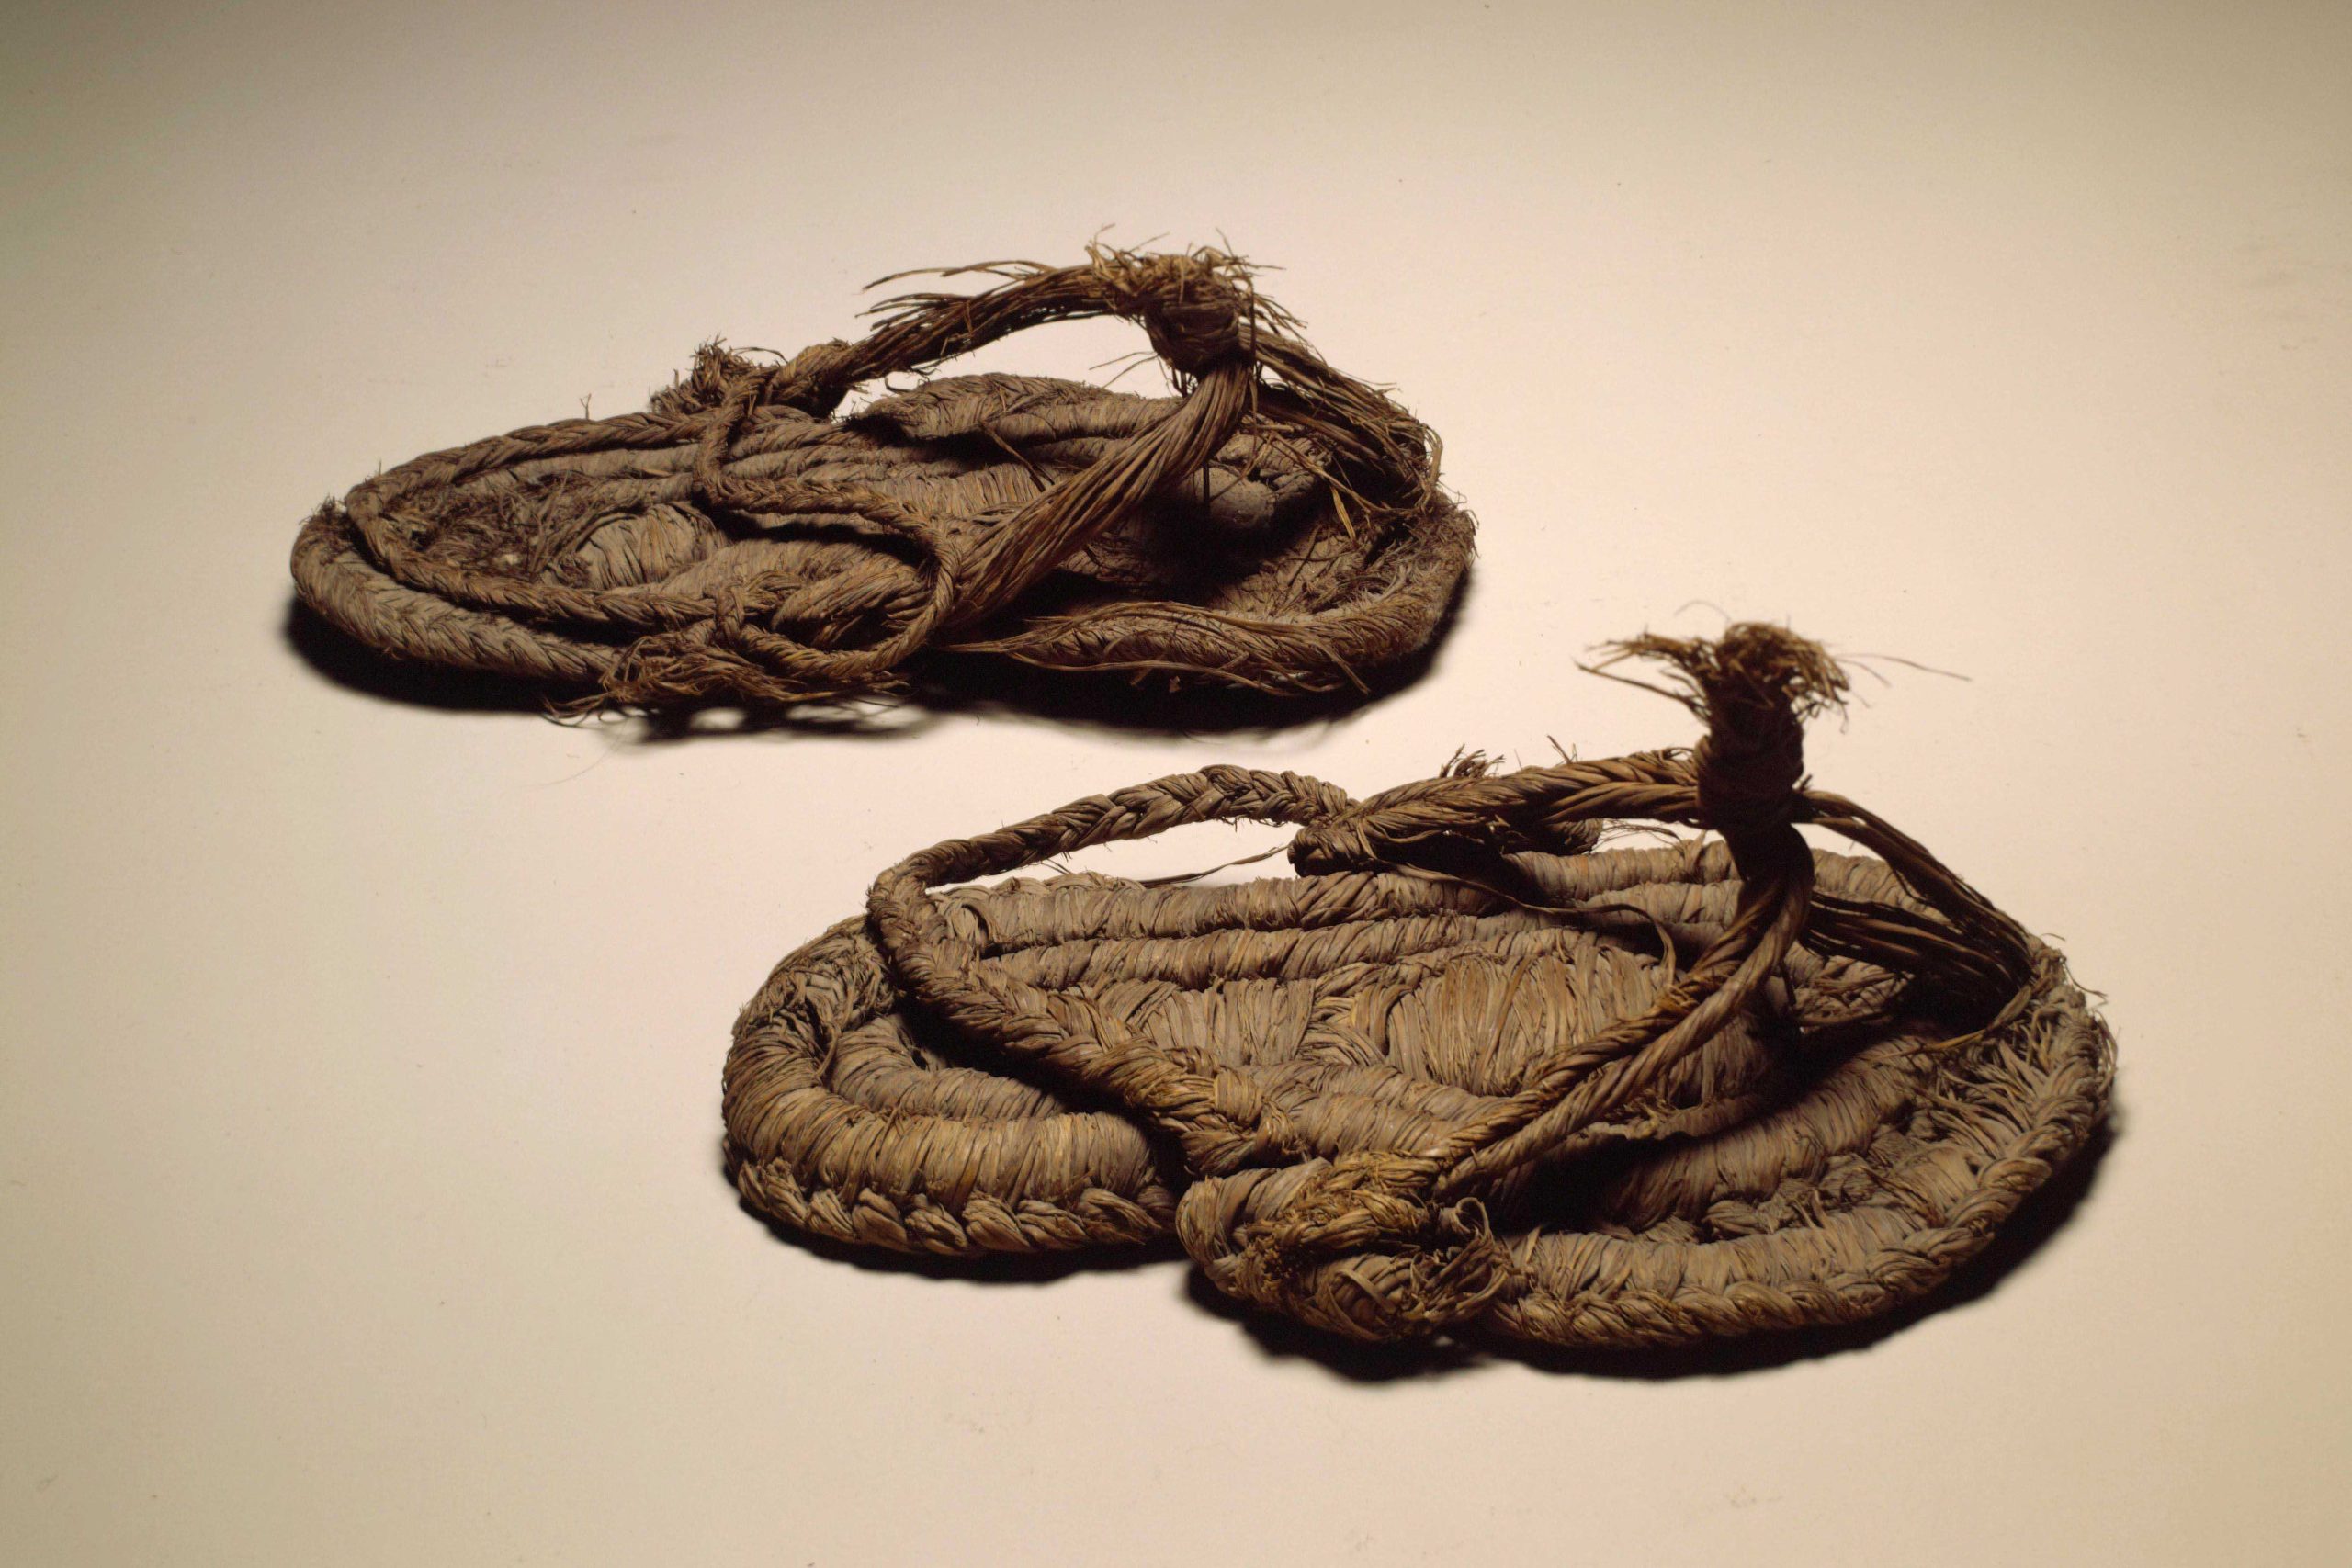 What Is The Oldest Sandals In The World? - Sandal Design